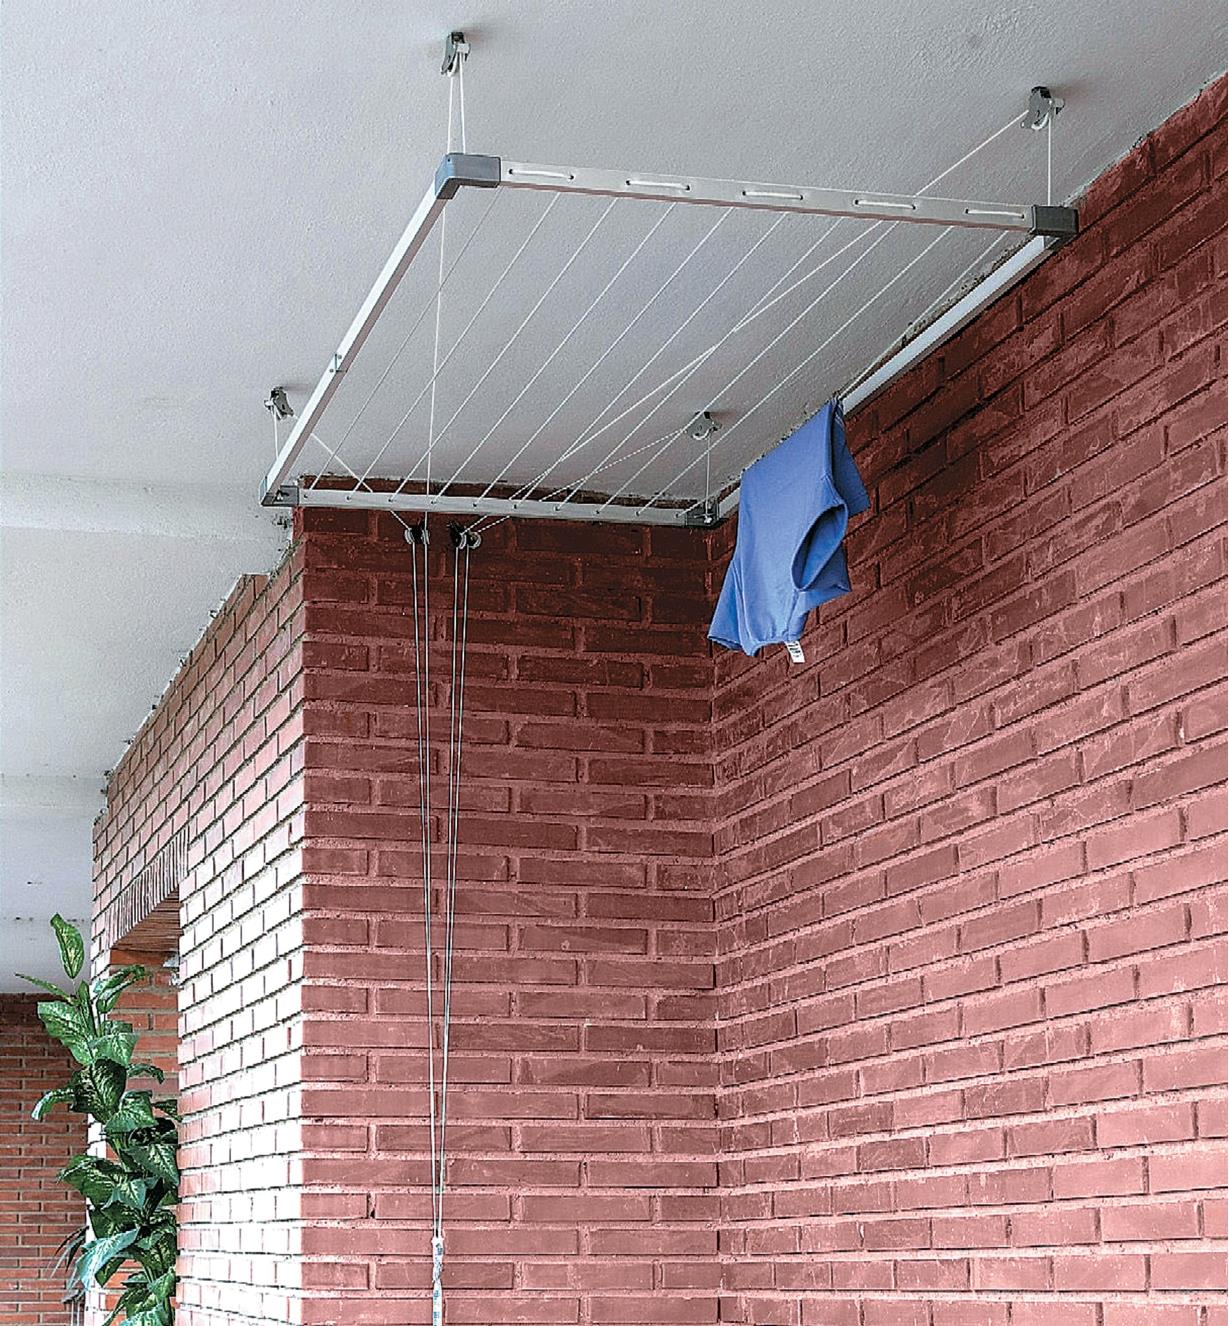 Drying rack in raised position close to a ceiling